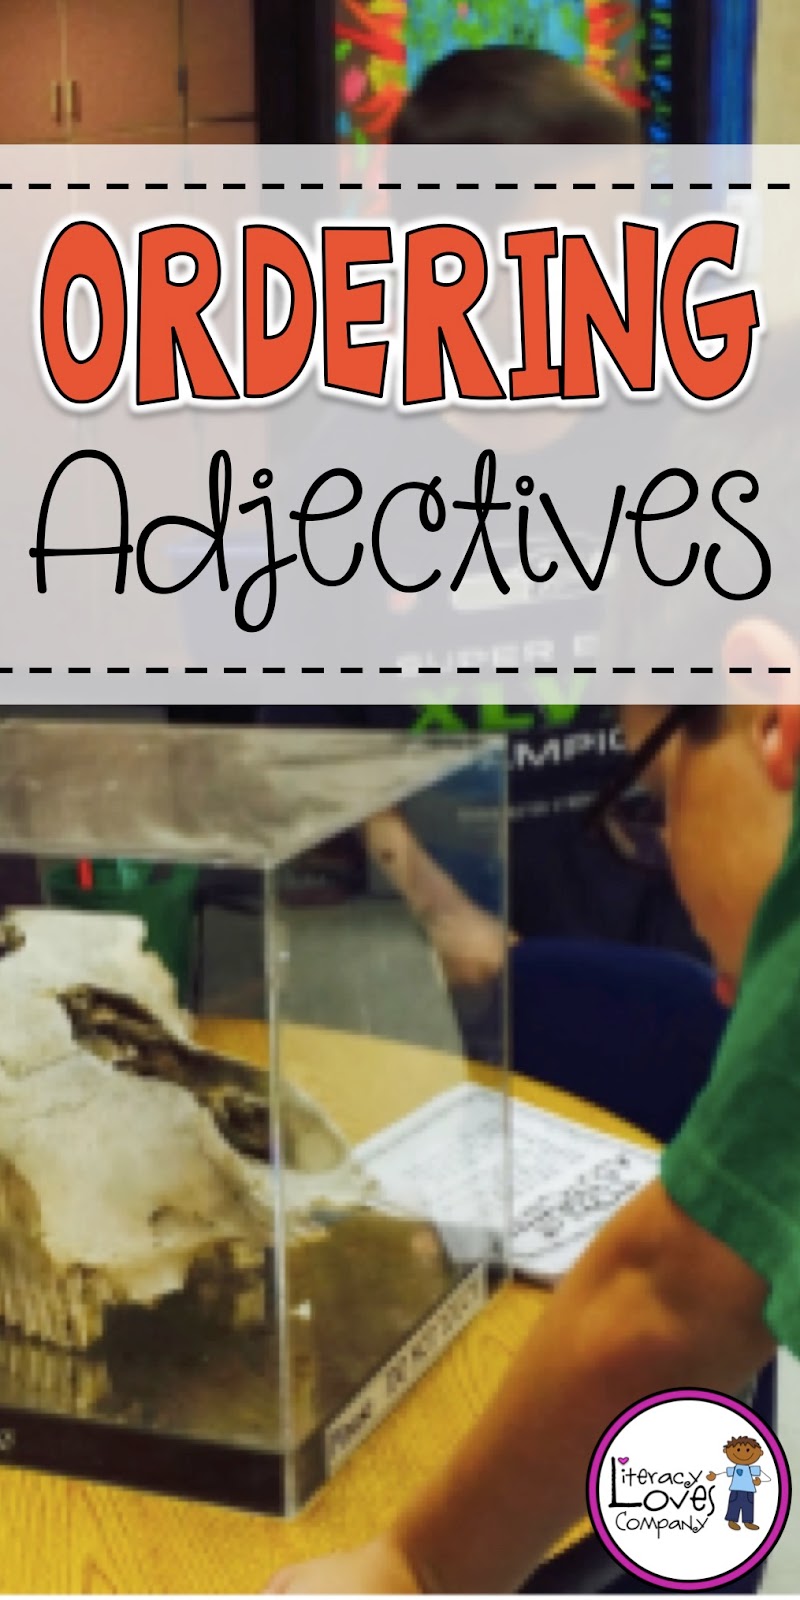 adjective-clause-definition-and-useful-examples-of-adjective-clauses-7-e-s-l-english-phonics